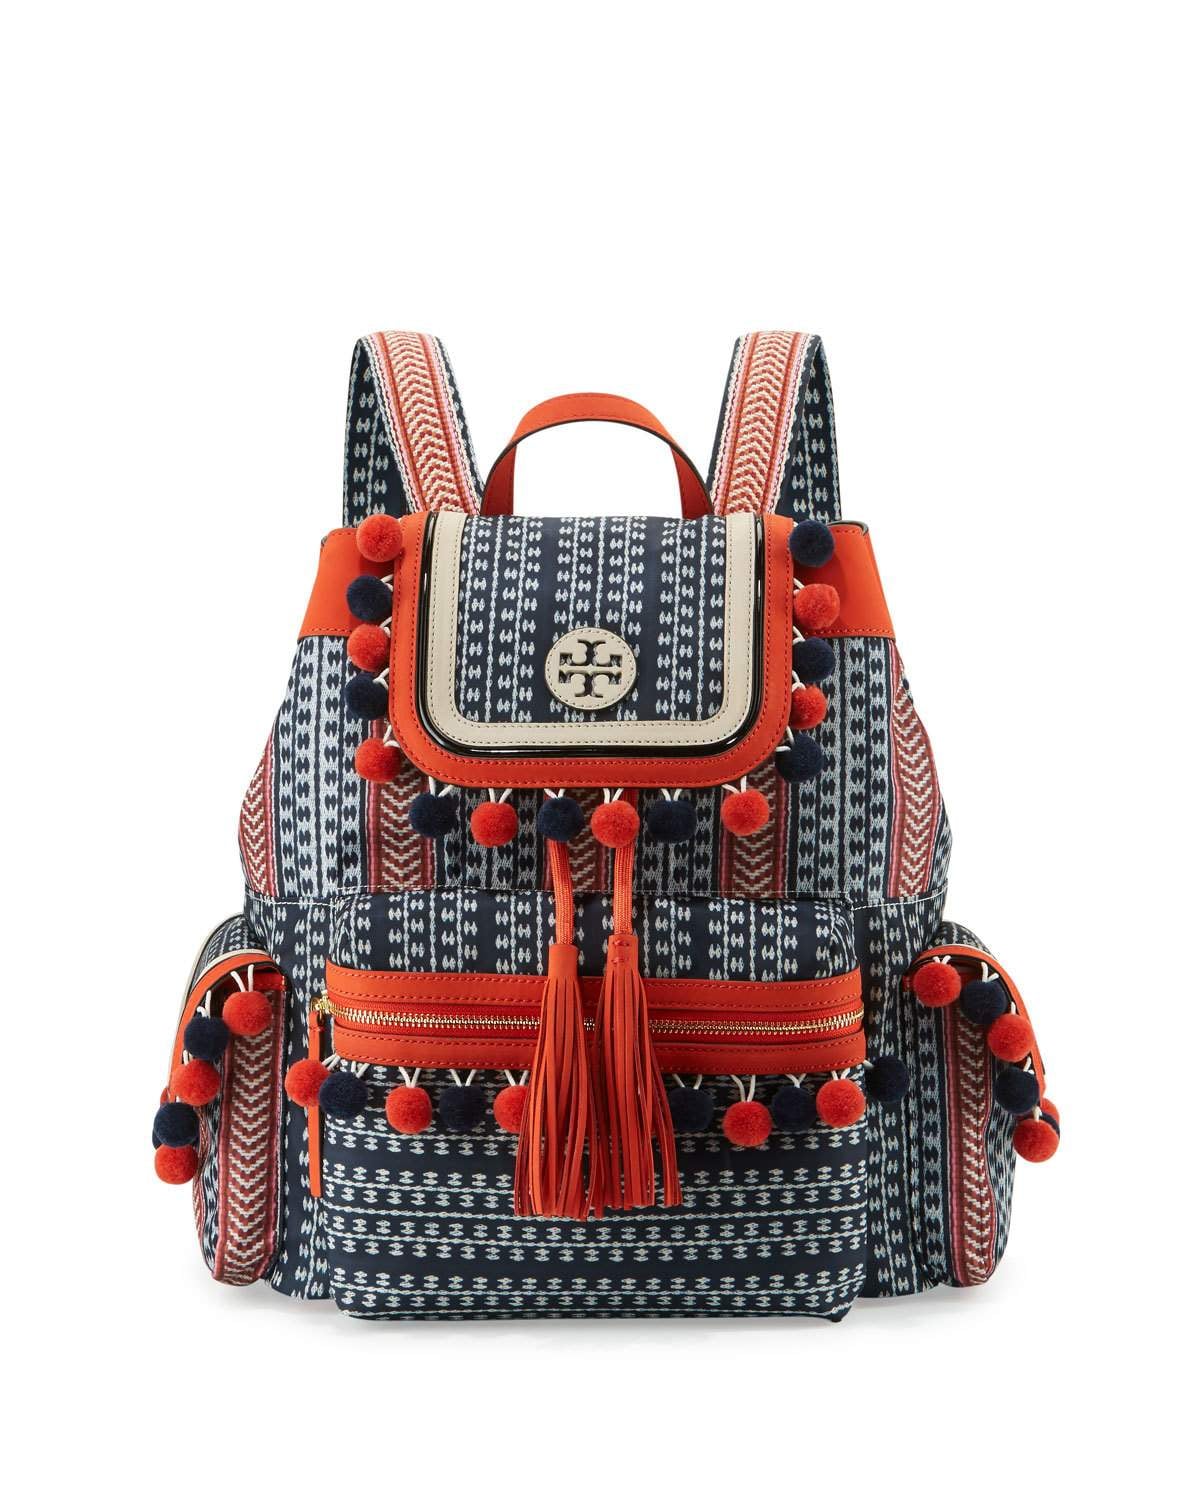 Try a Tory Burch Backpack | The Right Backpack For You — Based on Your  Favorite Designer Bag | POPSUGAR Fashion Photo 19